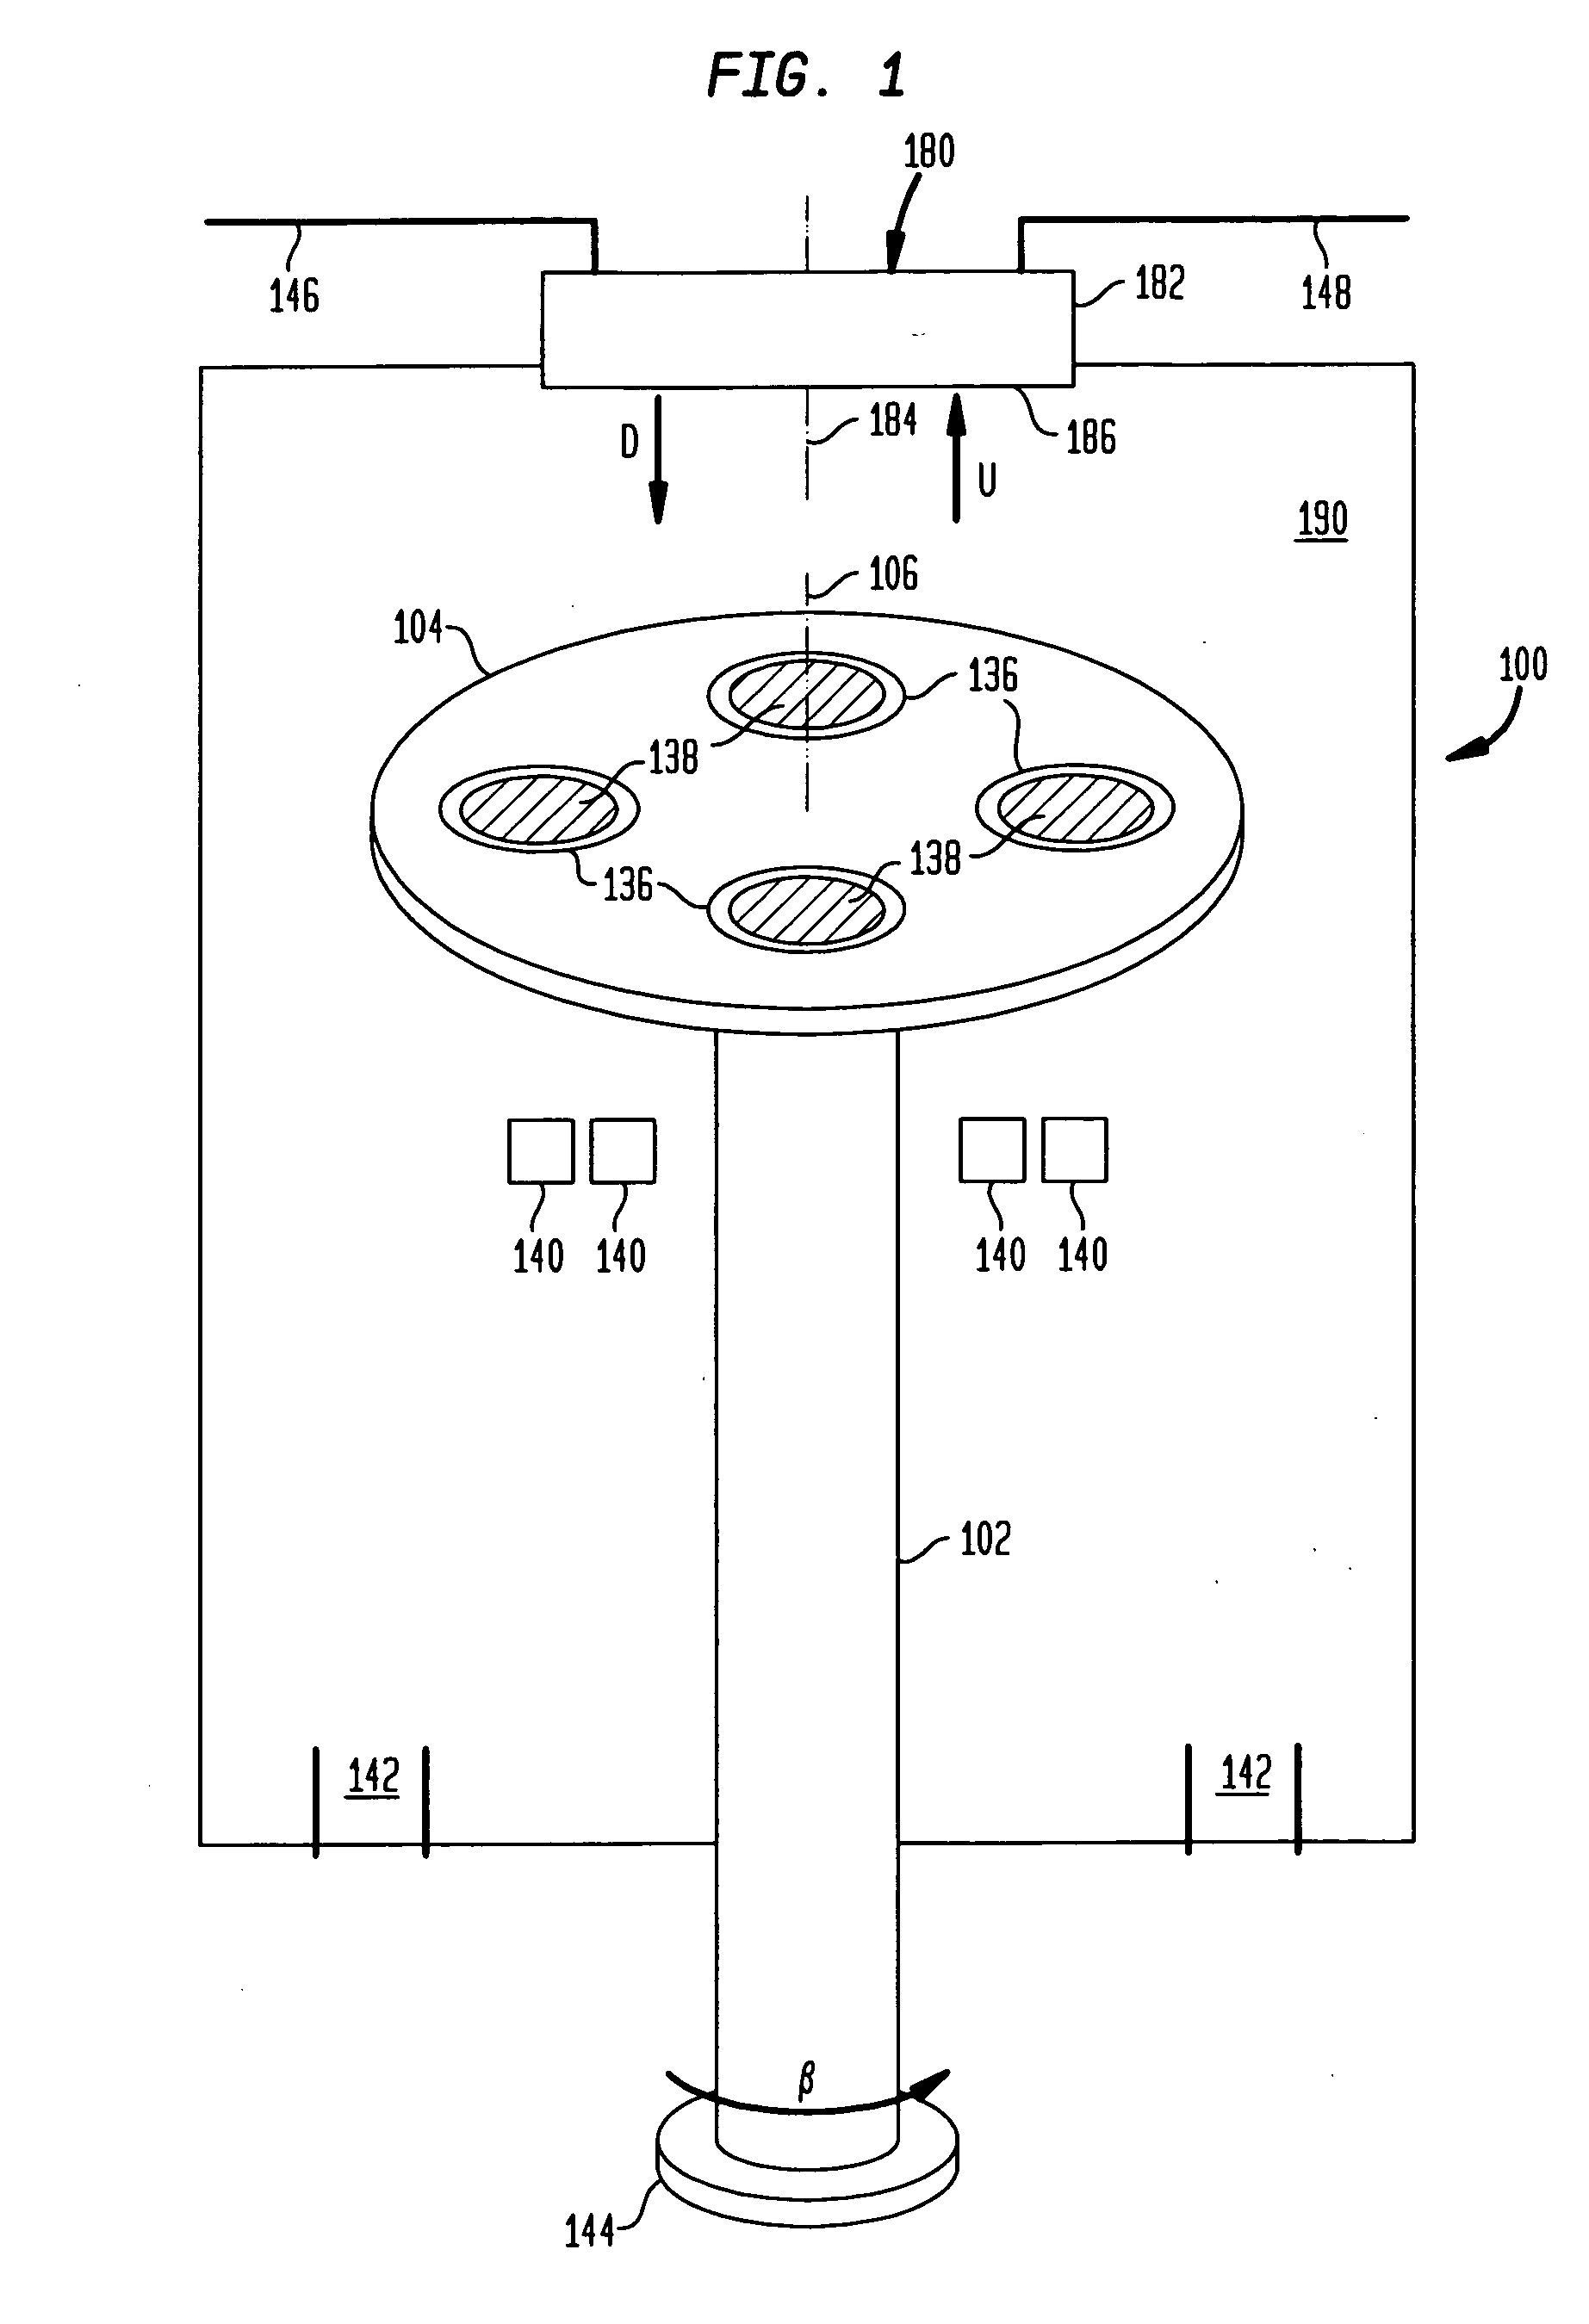 Movable injectors in rotating disc gas reactors